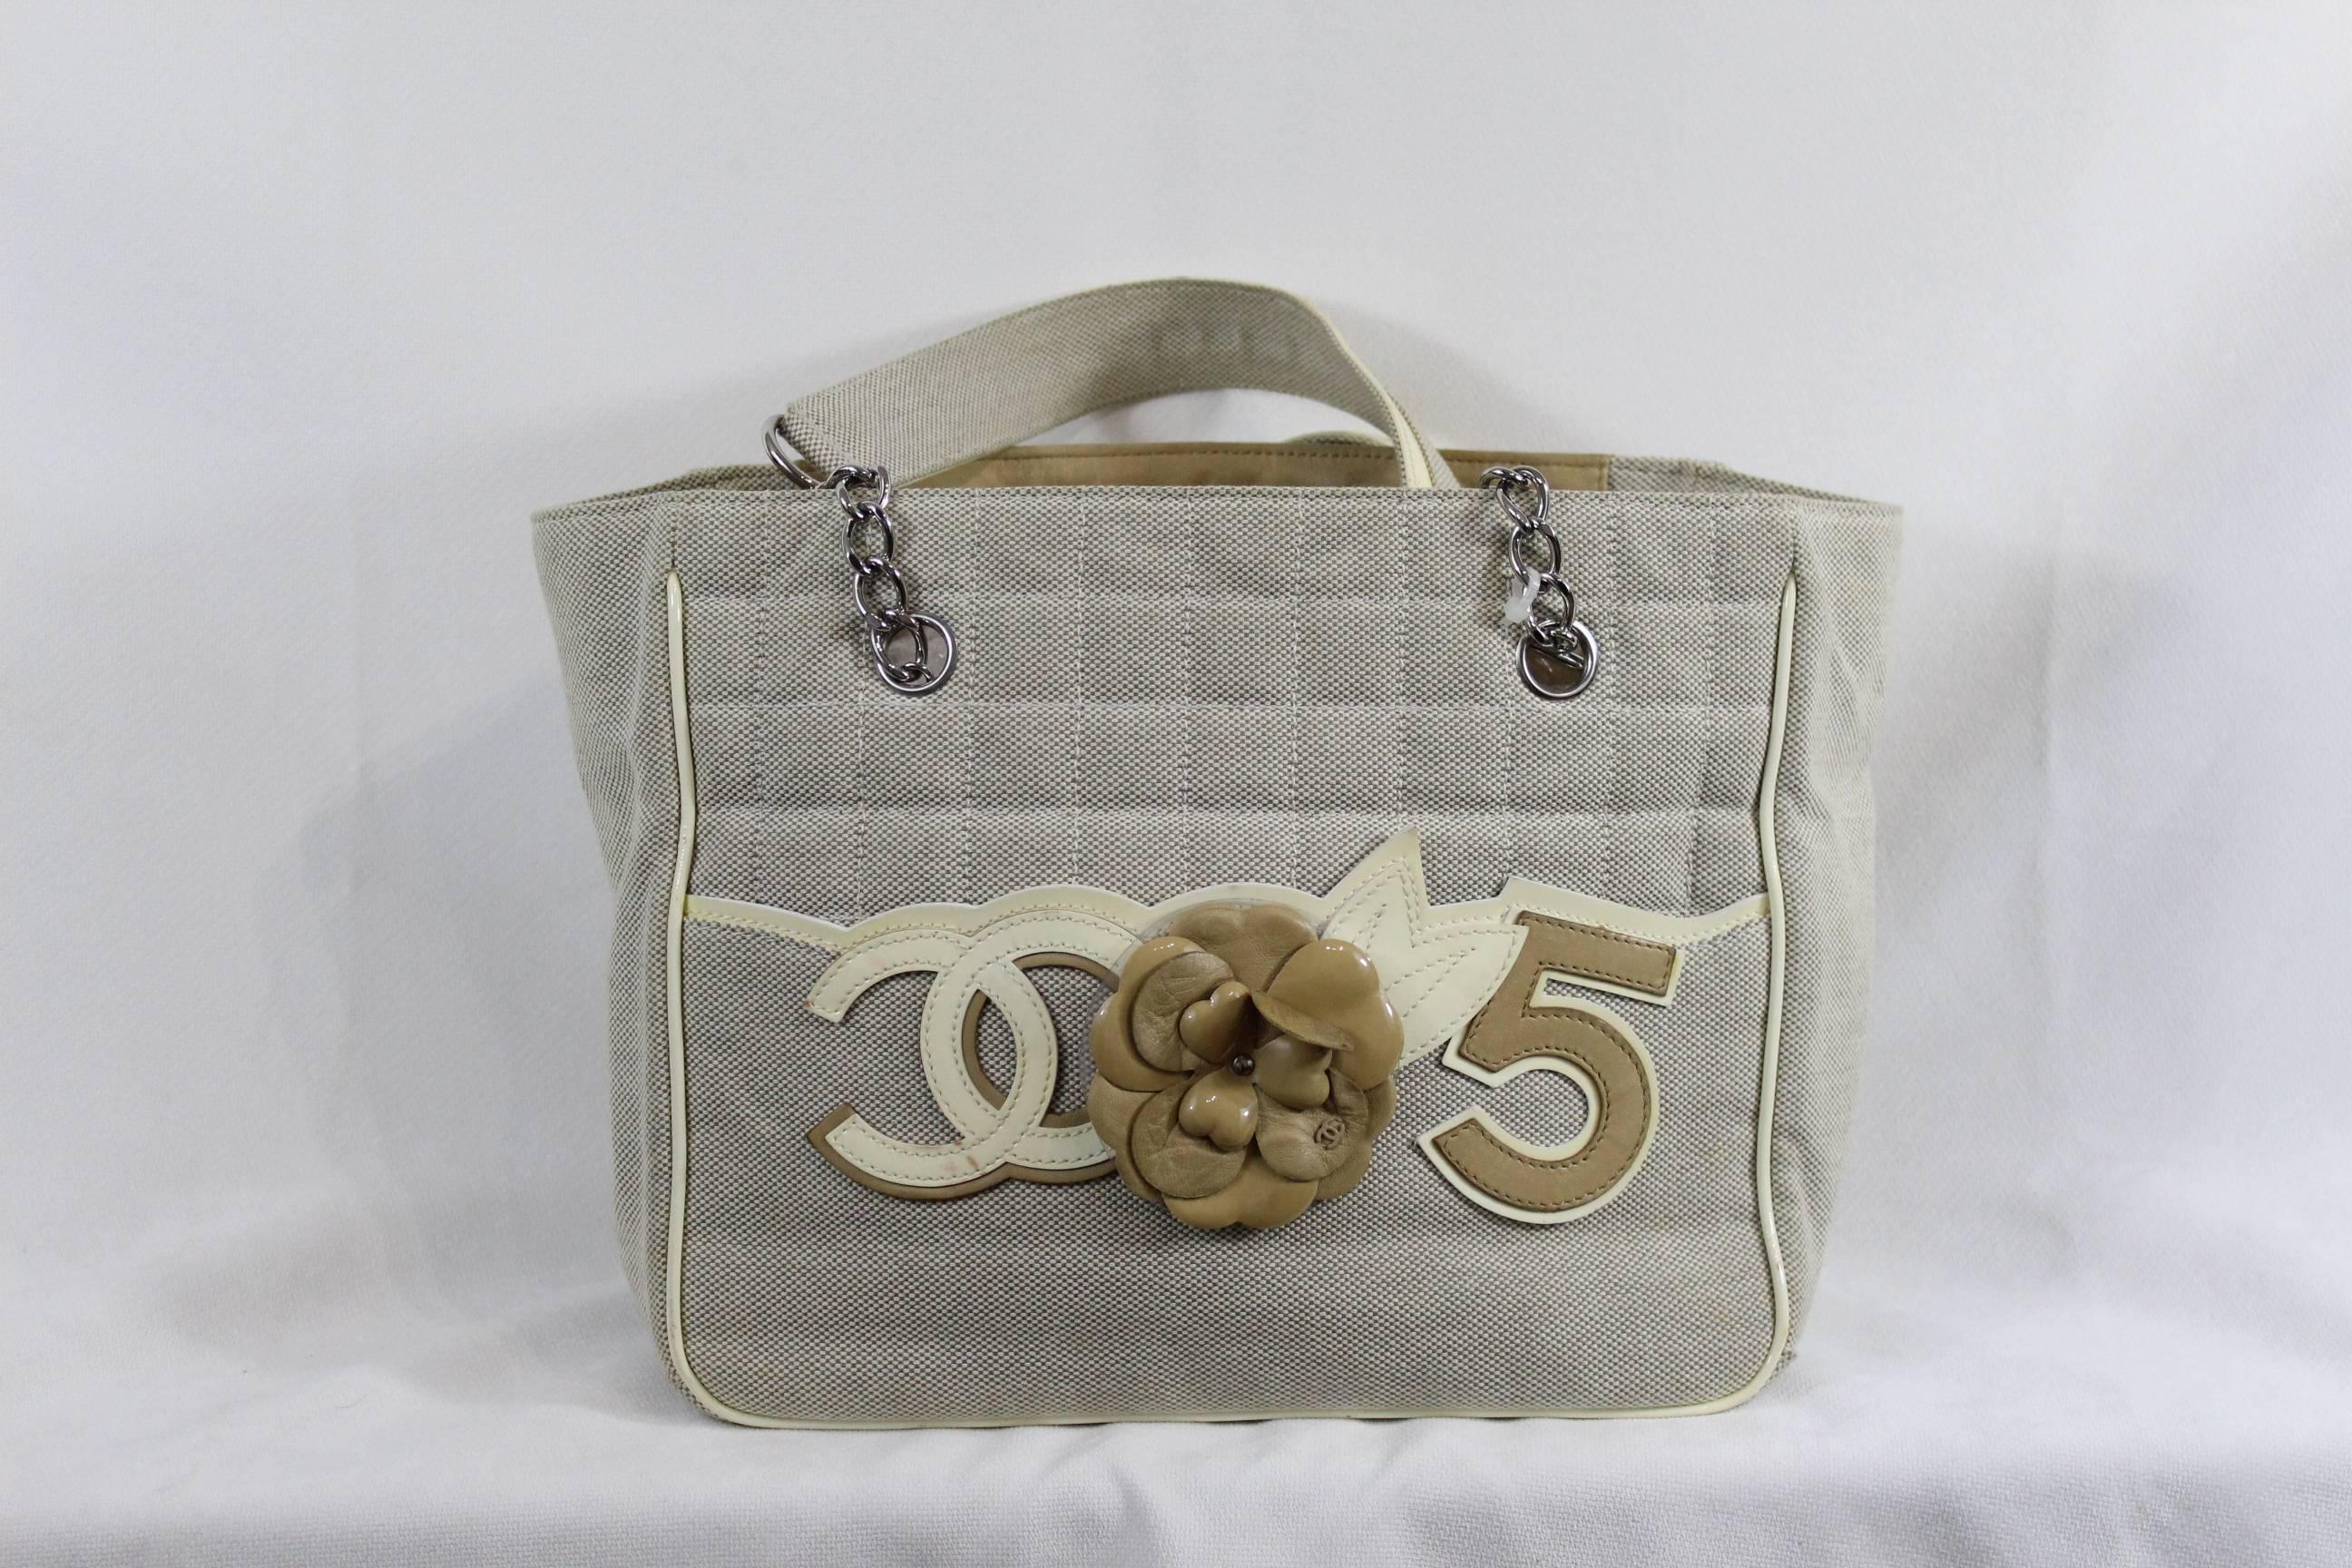 Women's 2005-2006 Chanel Camelia N°5 Tote Bag in Canvas and Patented Leather